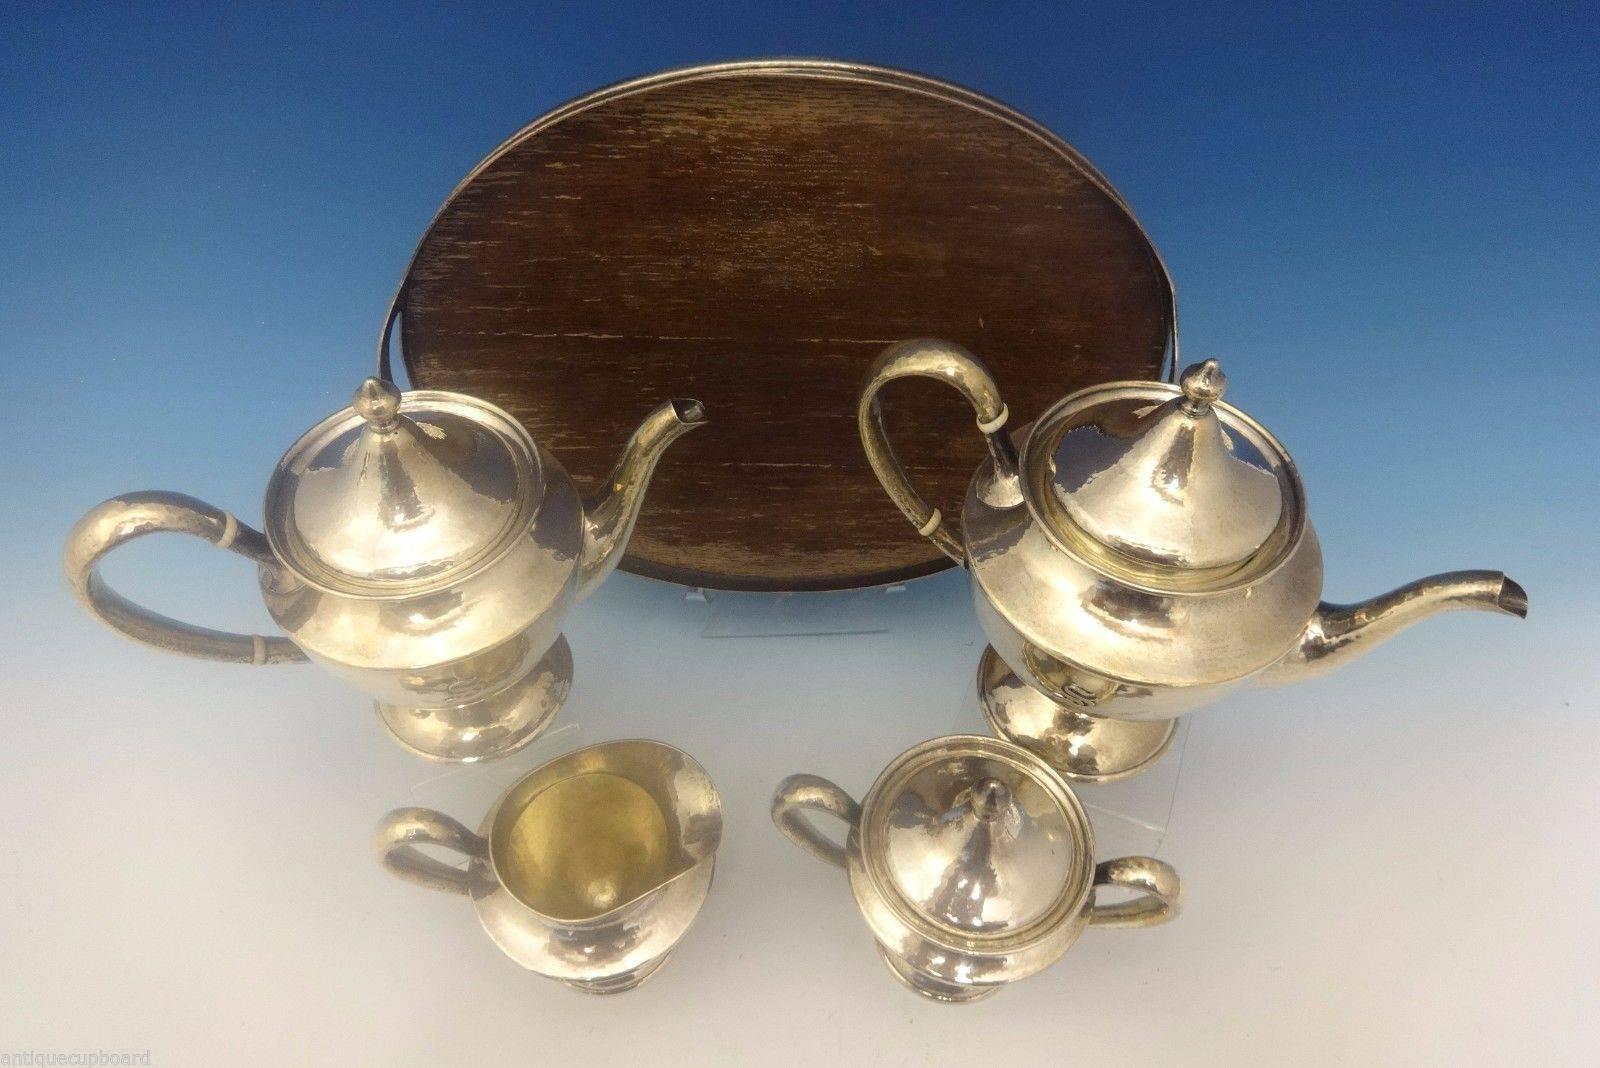 Antique hammered by Shreve.

Arts & Crafts antique hammered by Shreve five-piece sterling tea set. The set has an applied "S" monogram and is marked with #3752. The set dates from about 1915. It includes:

 Coffee pot: Holds two pints